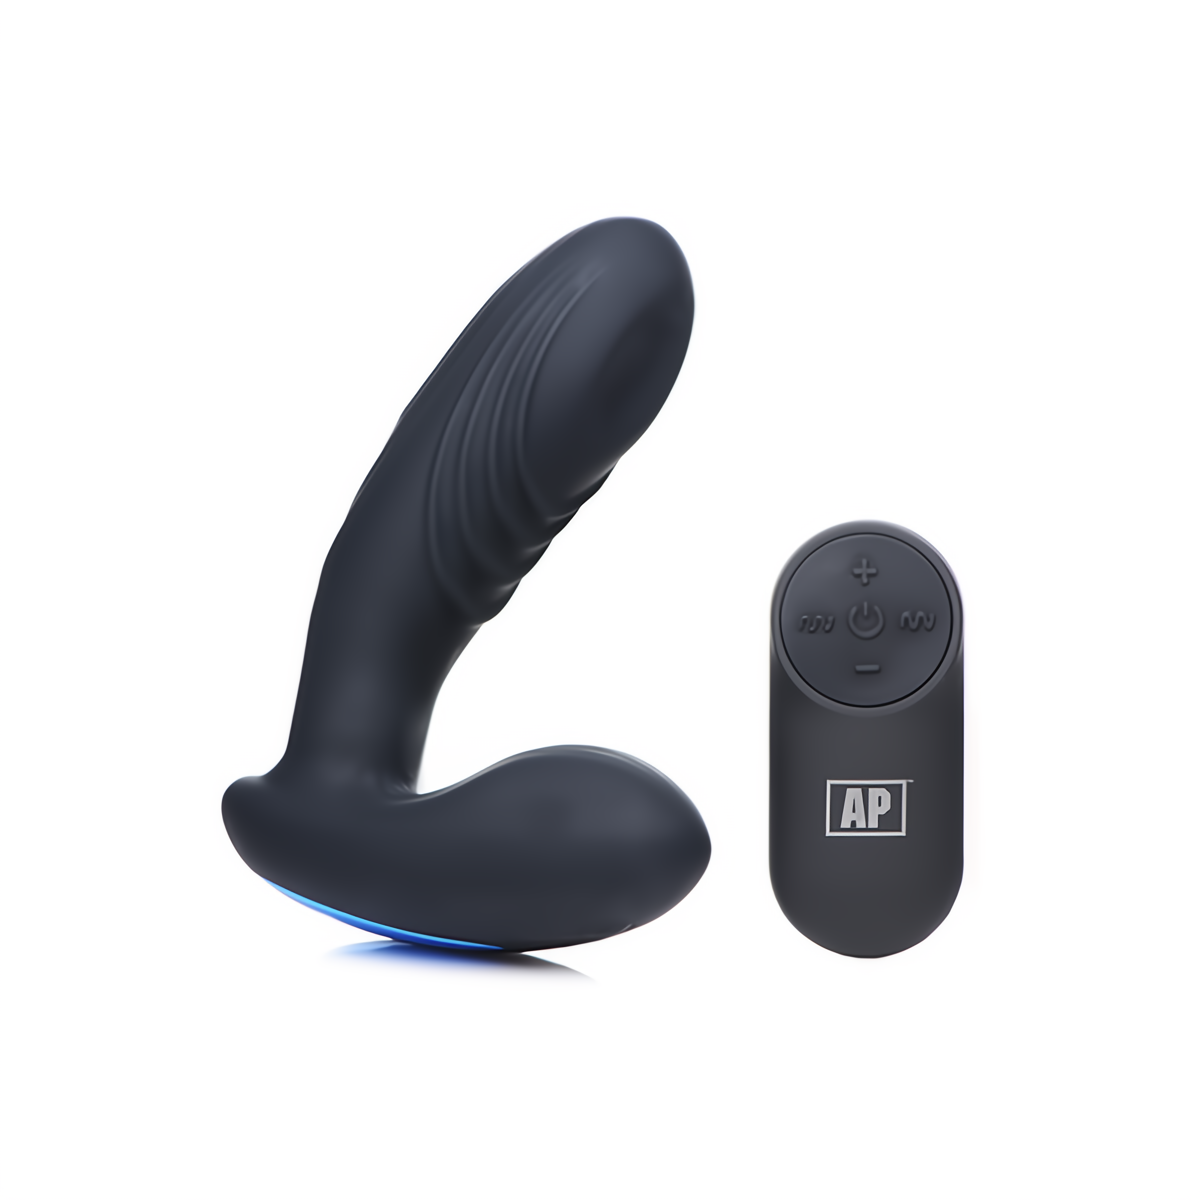 P-Thump - Tapping Prostate Vibrator with Remote Control and 7 Speeds